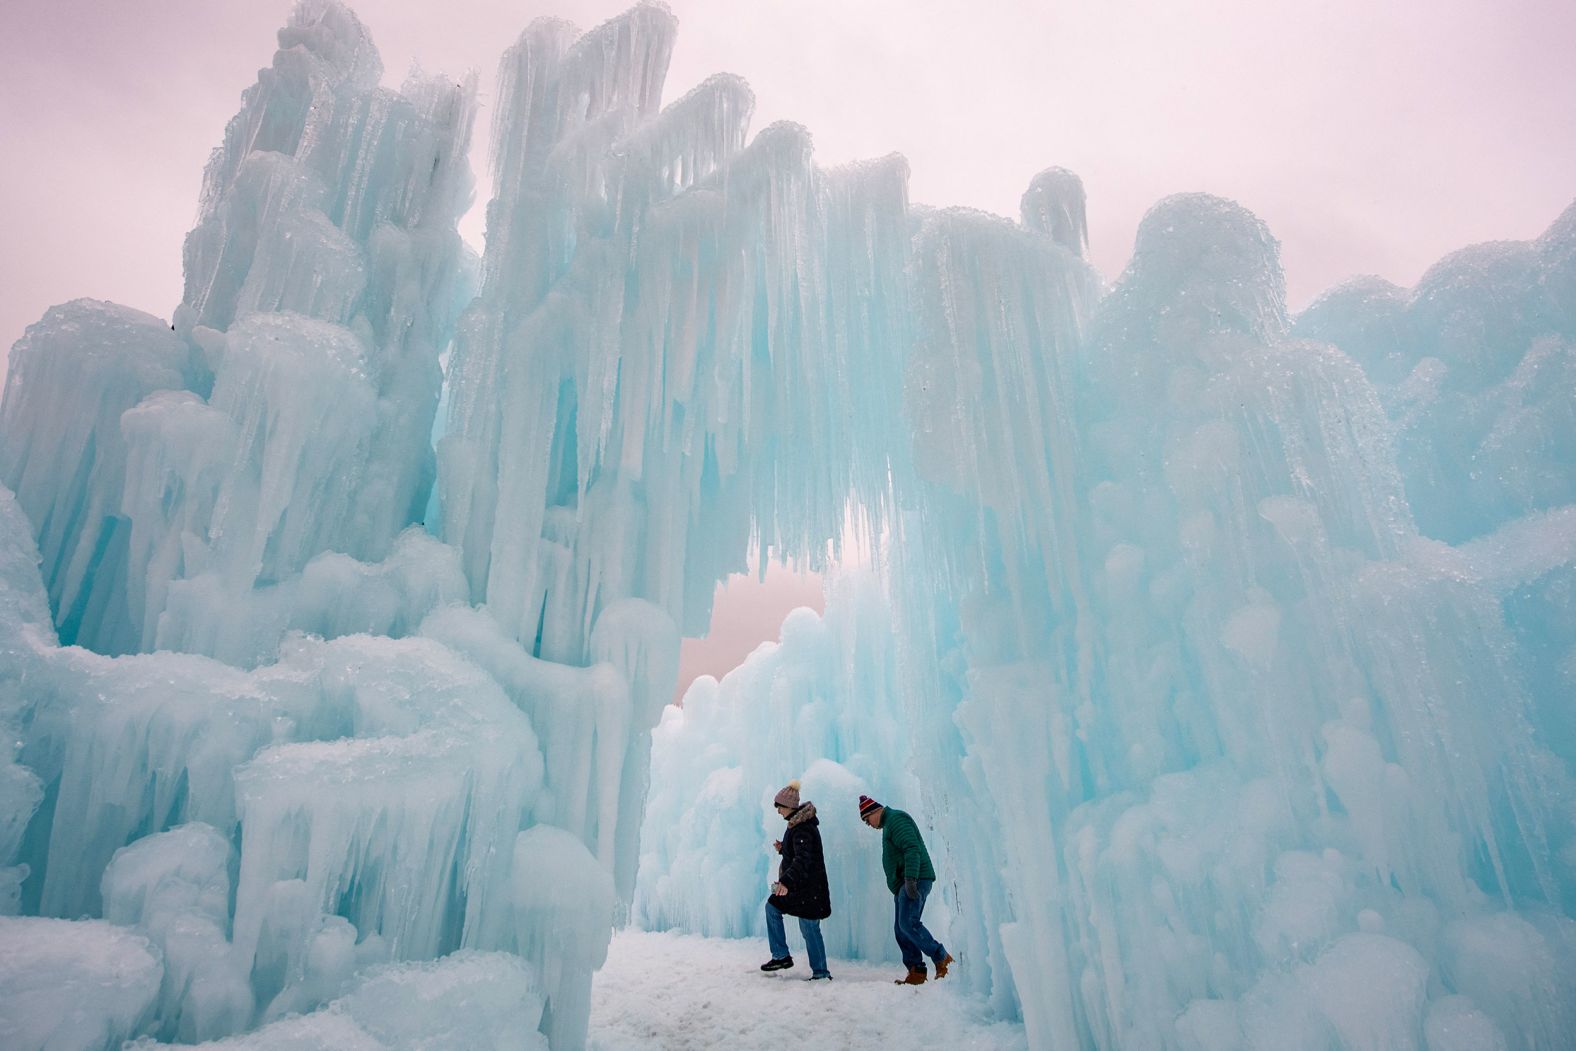 People explore the ice walls, trails and caverns at the Ice Castles tourist attraction in North Woodstock, New Hampshire, on Thursday, February 1.